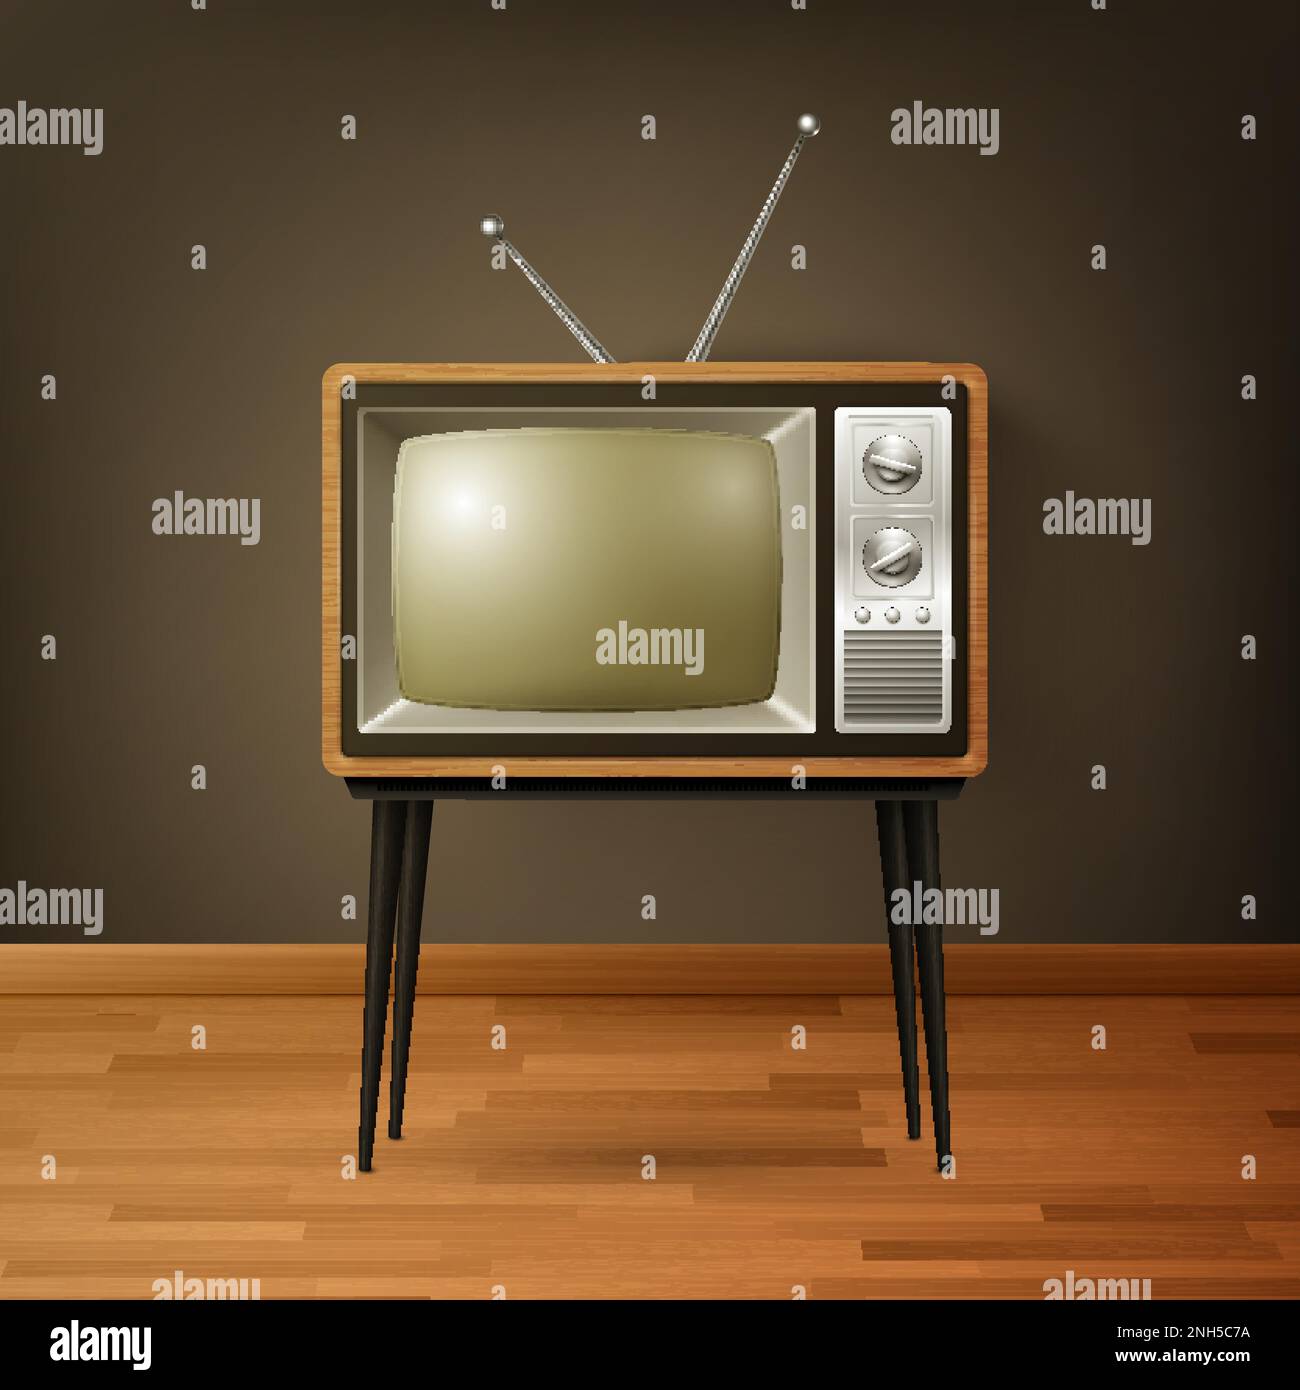 Vector 3d Realistic Brown Wooden Retro TV Receiver on Wooden Floor. Home Interior Design Concept. Vintage TV Set, Television, Front View Stock Vector